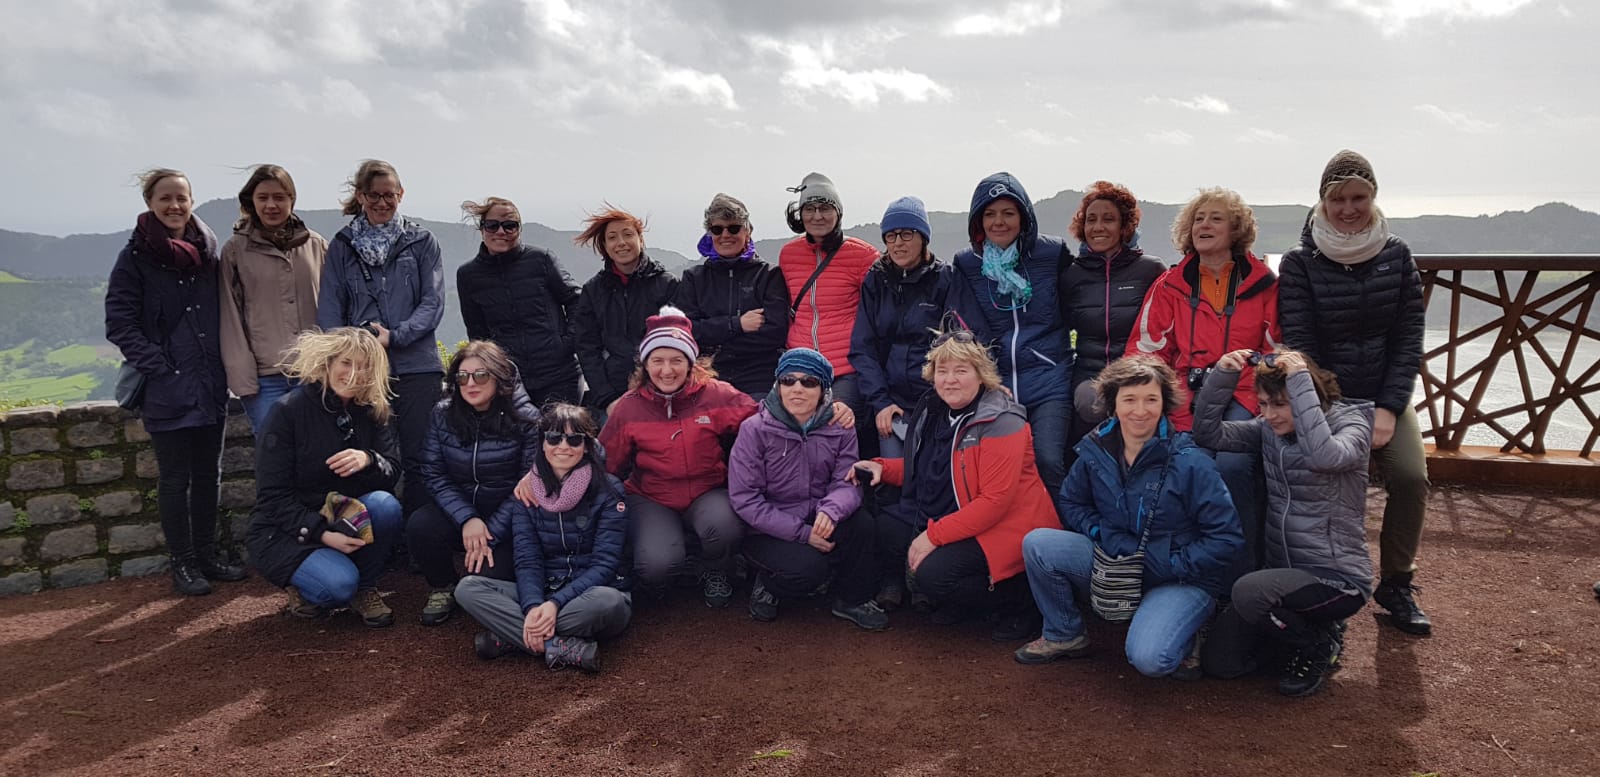 "Women of EUROVOLC" during a field-trip at the Pico do Ferro viewpoint on the Azores during the annnual meeting (photo: Fabrice Brito)